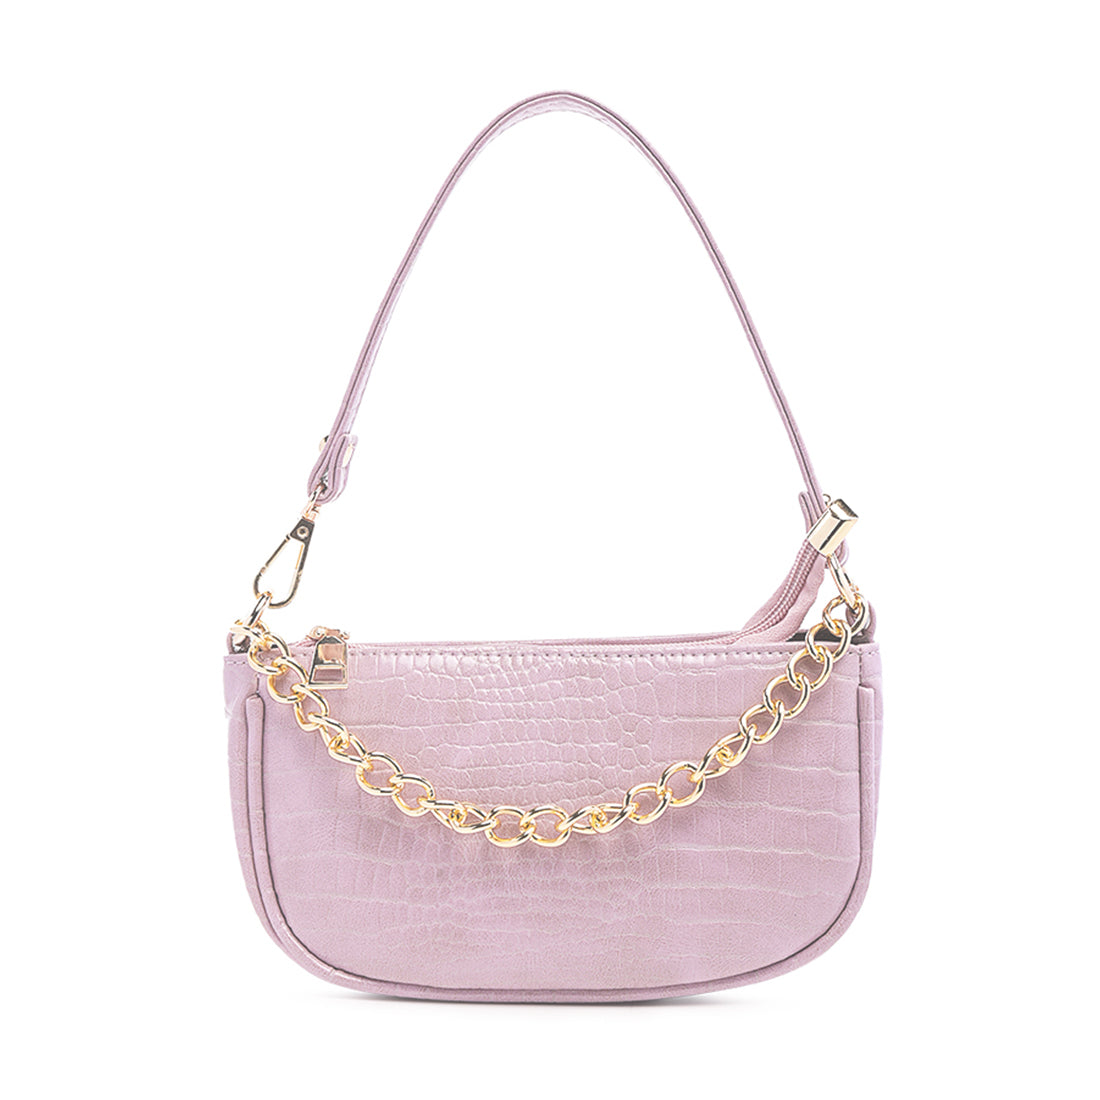 Croc Sling Bag in Lilac